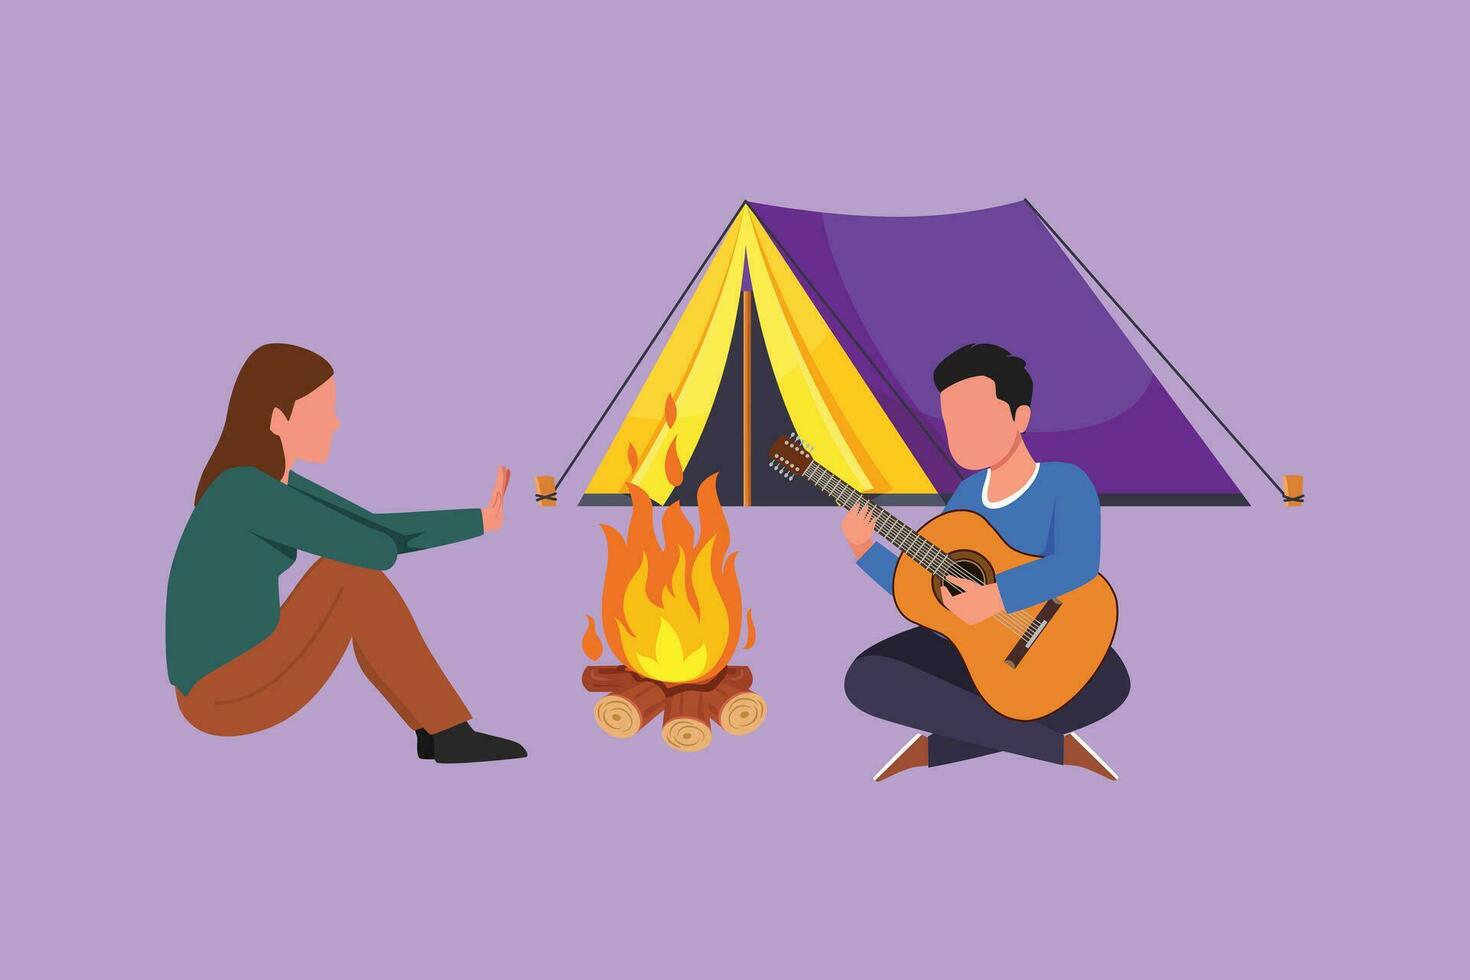 Cartoon flat style drawing couple camping around campfire tents. Man woman warm their hands near bonfire, man playing guitar and sing song. Nature exploration trip. Graphic design vector illustration